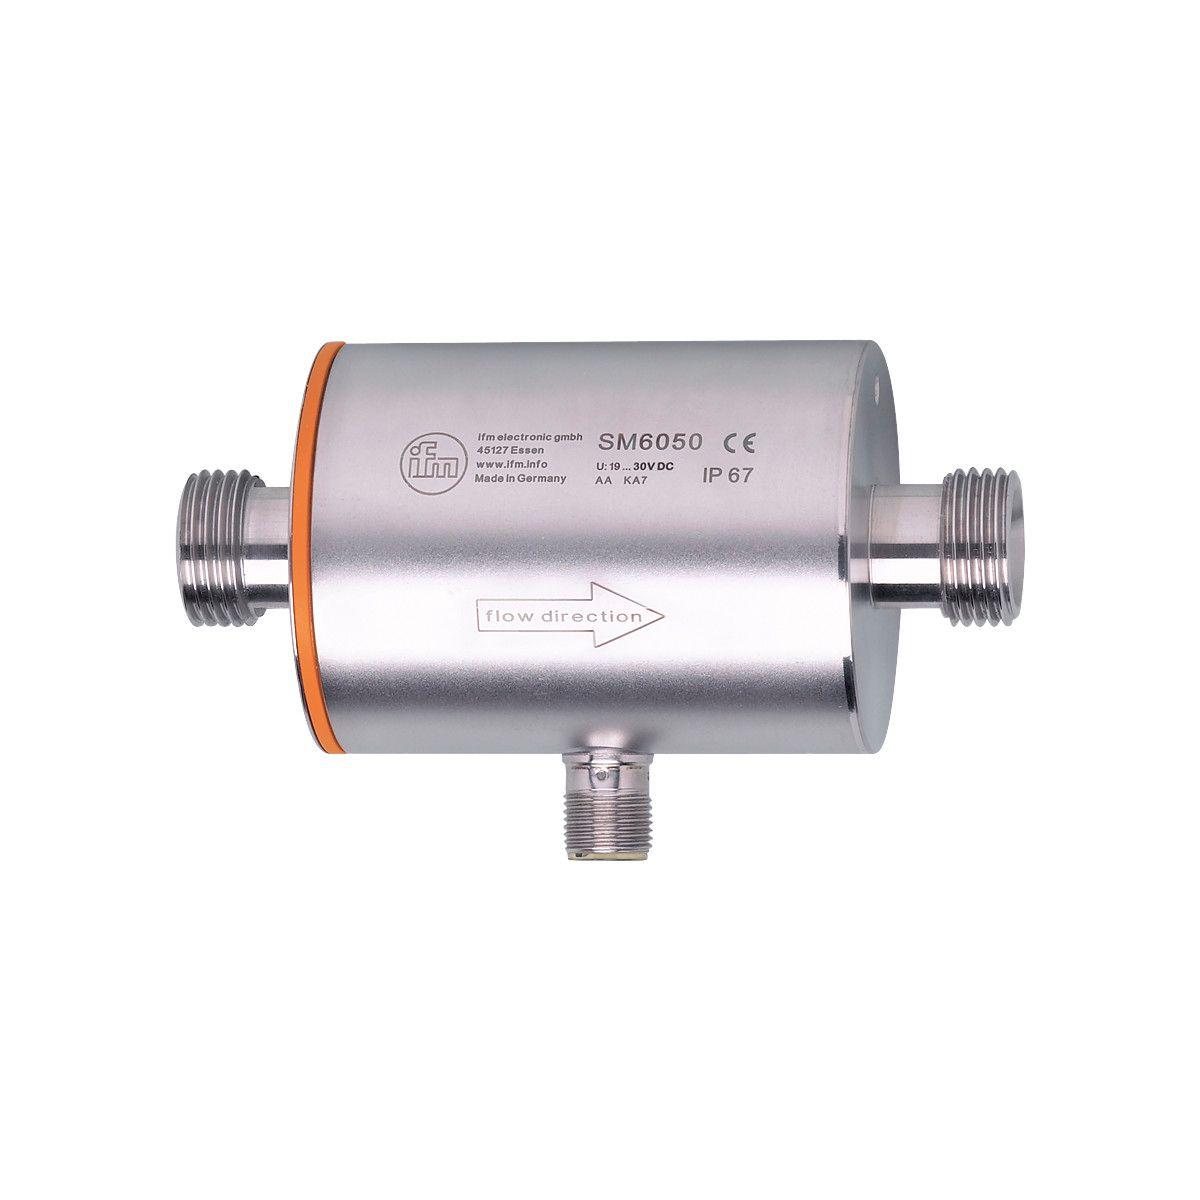 ifm Electronic SM6050 Magnetic-inductive flow meter, Number of inputs and outputs: Number of analog outputs: 1, Measuring range [l/min]: 0.1...25, Process connection: threaded connection G 1/2 DN15 flat seal, System: gold-plated contacts, Application: for industrial applicatio